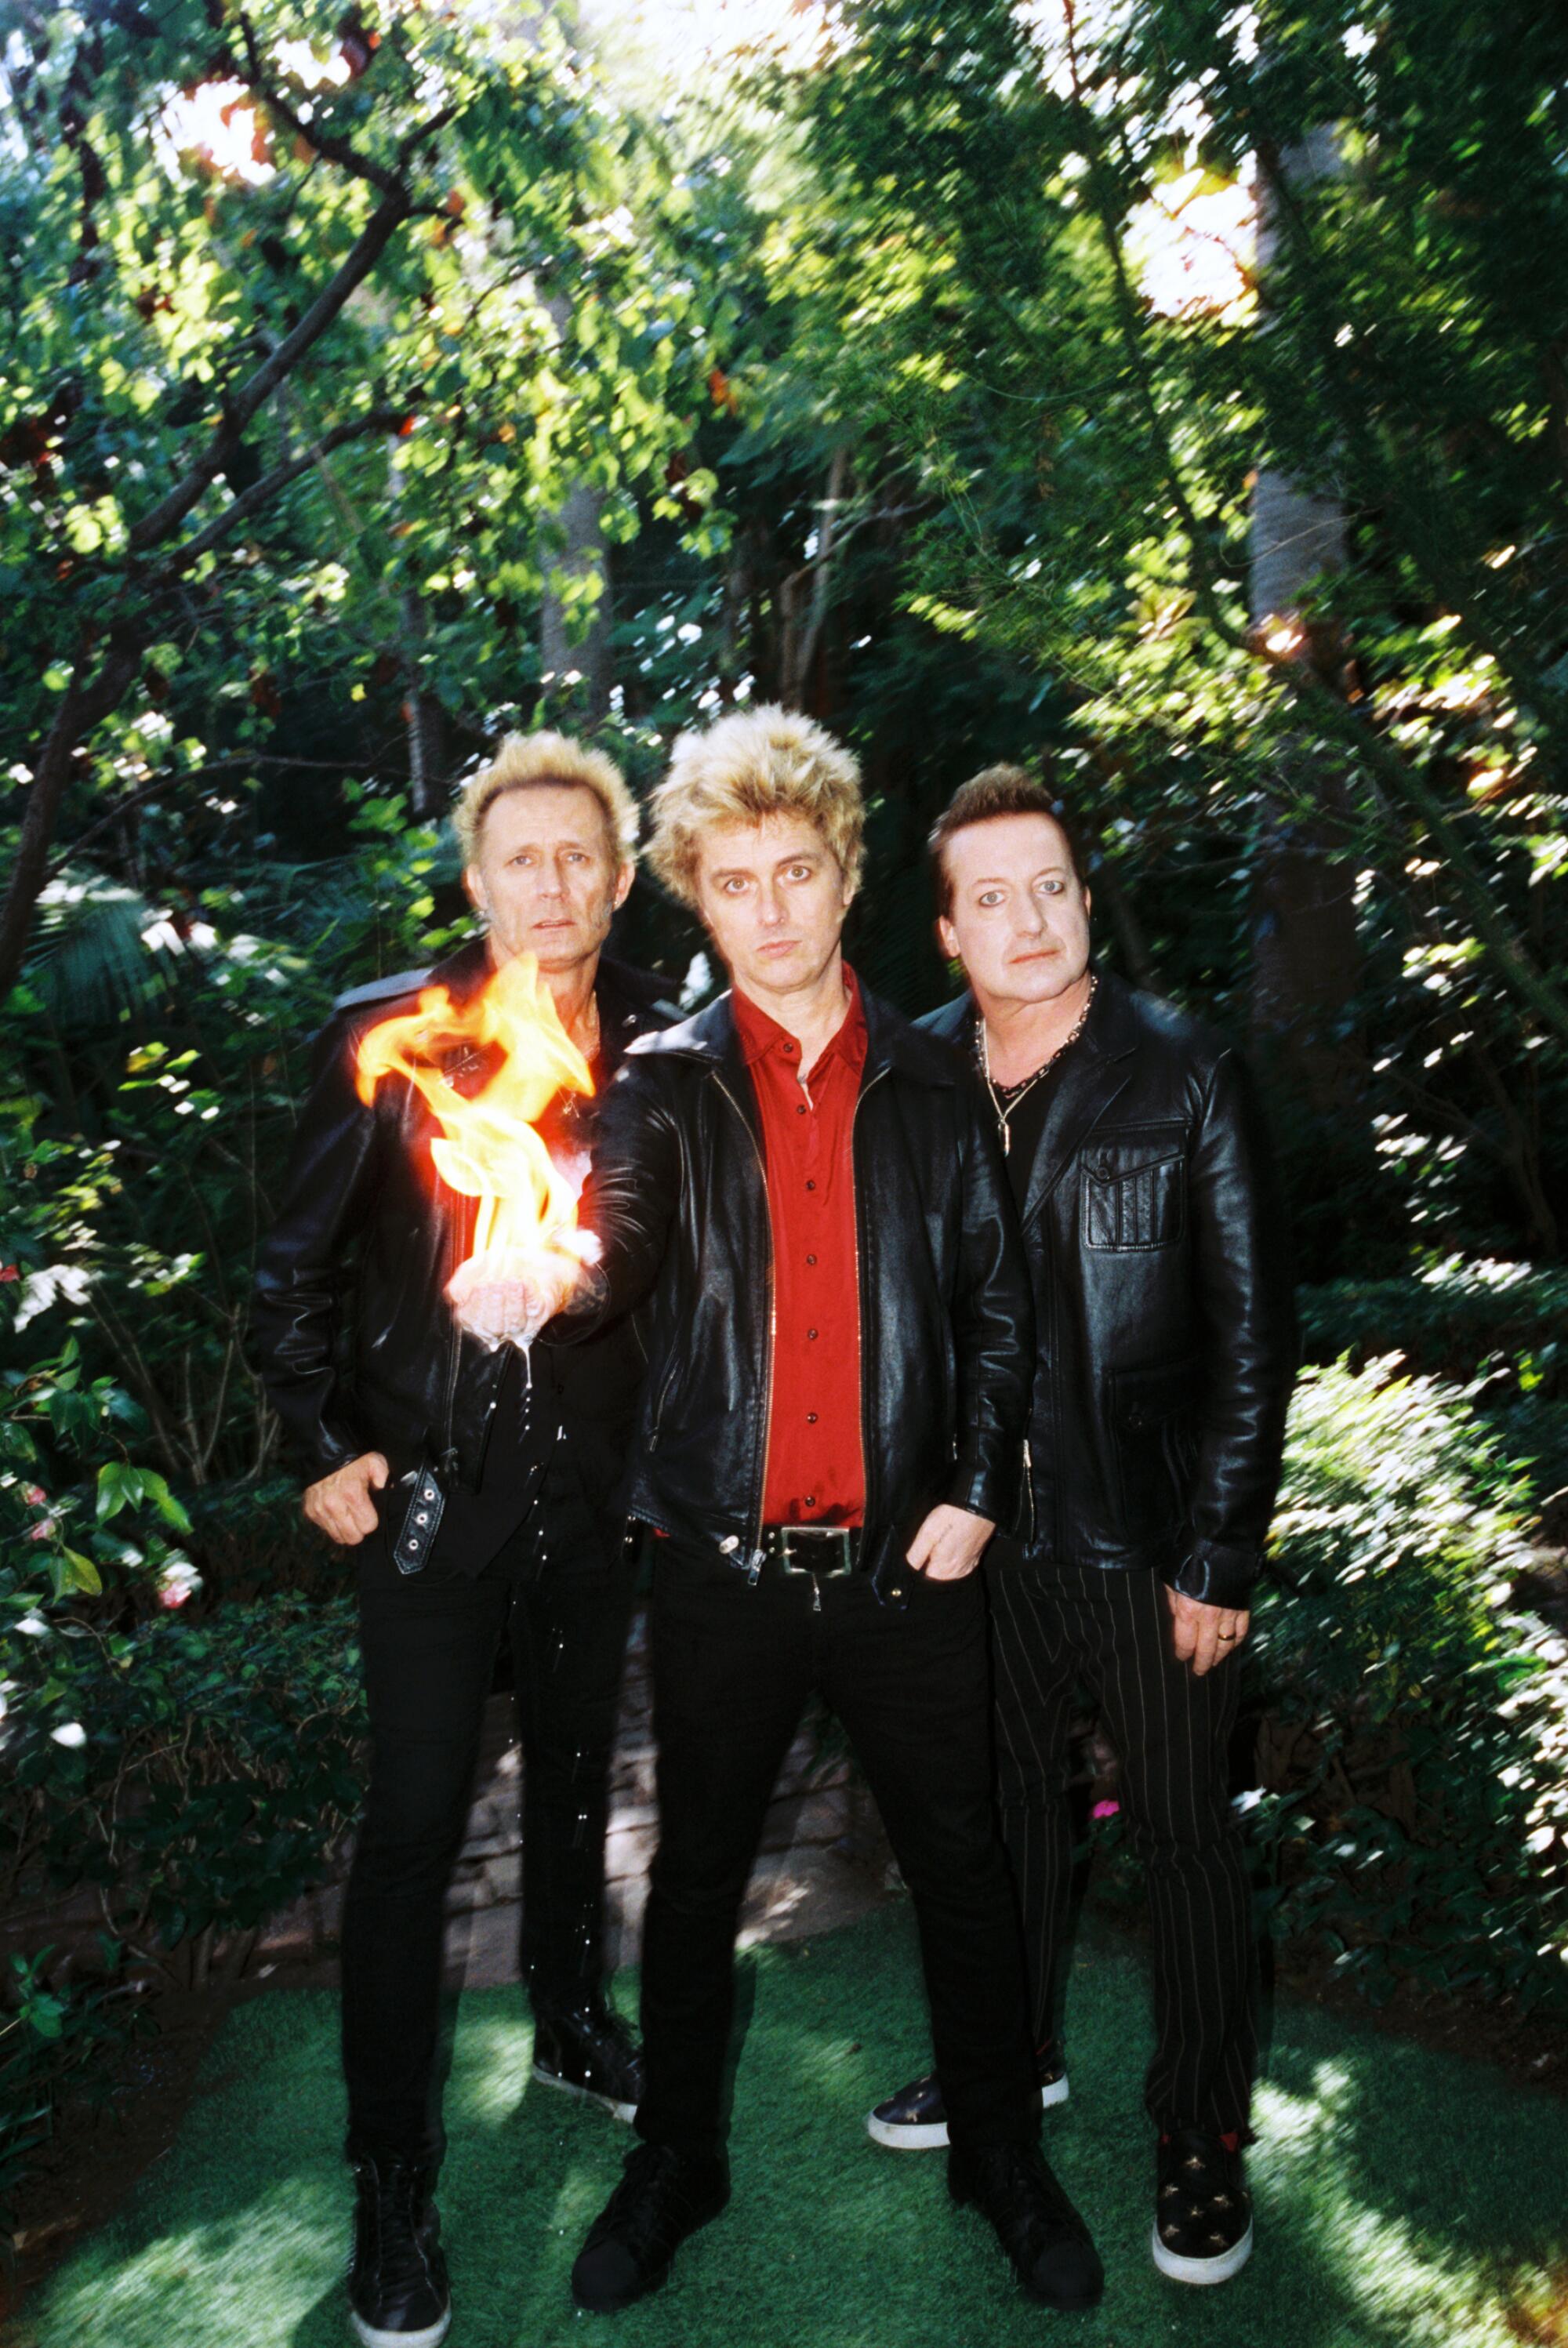 Mike Dirnt, Billie Joe Armstrong and Tre Cool of Green Day.